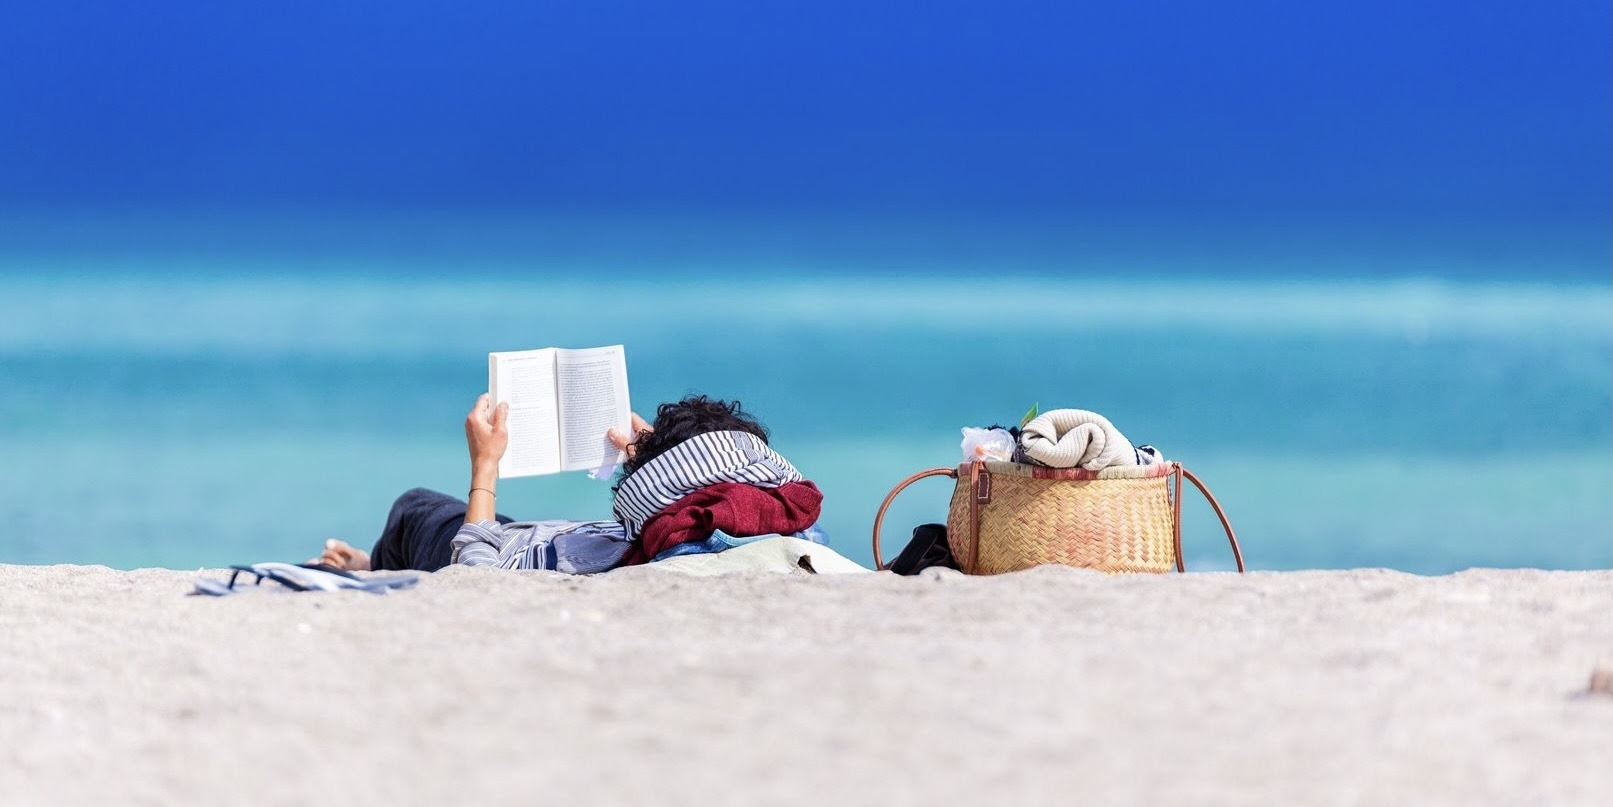 A photograph of a white woman laying on beach sand with a basket/purse nearby, reading a book.